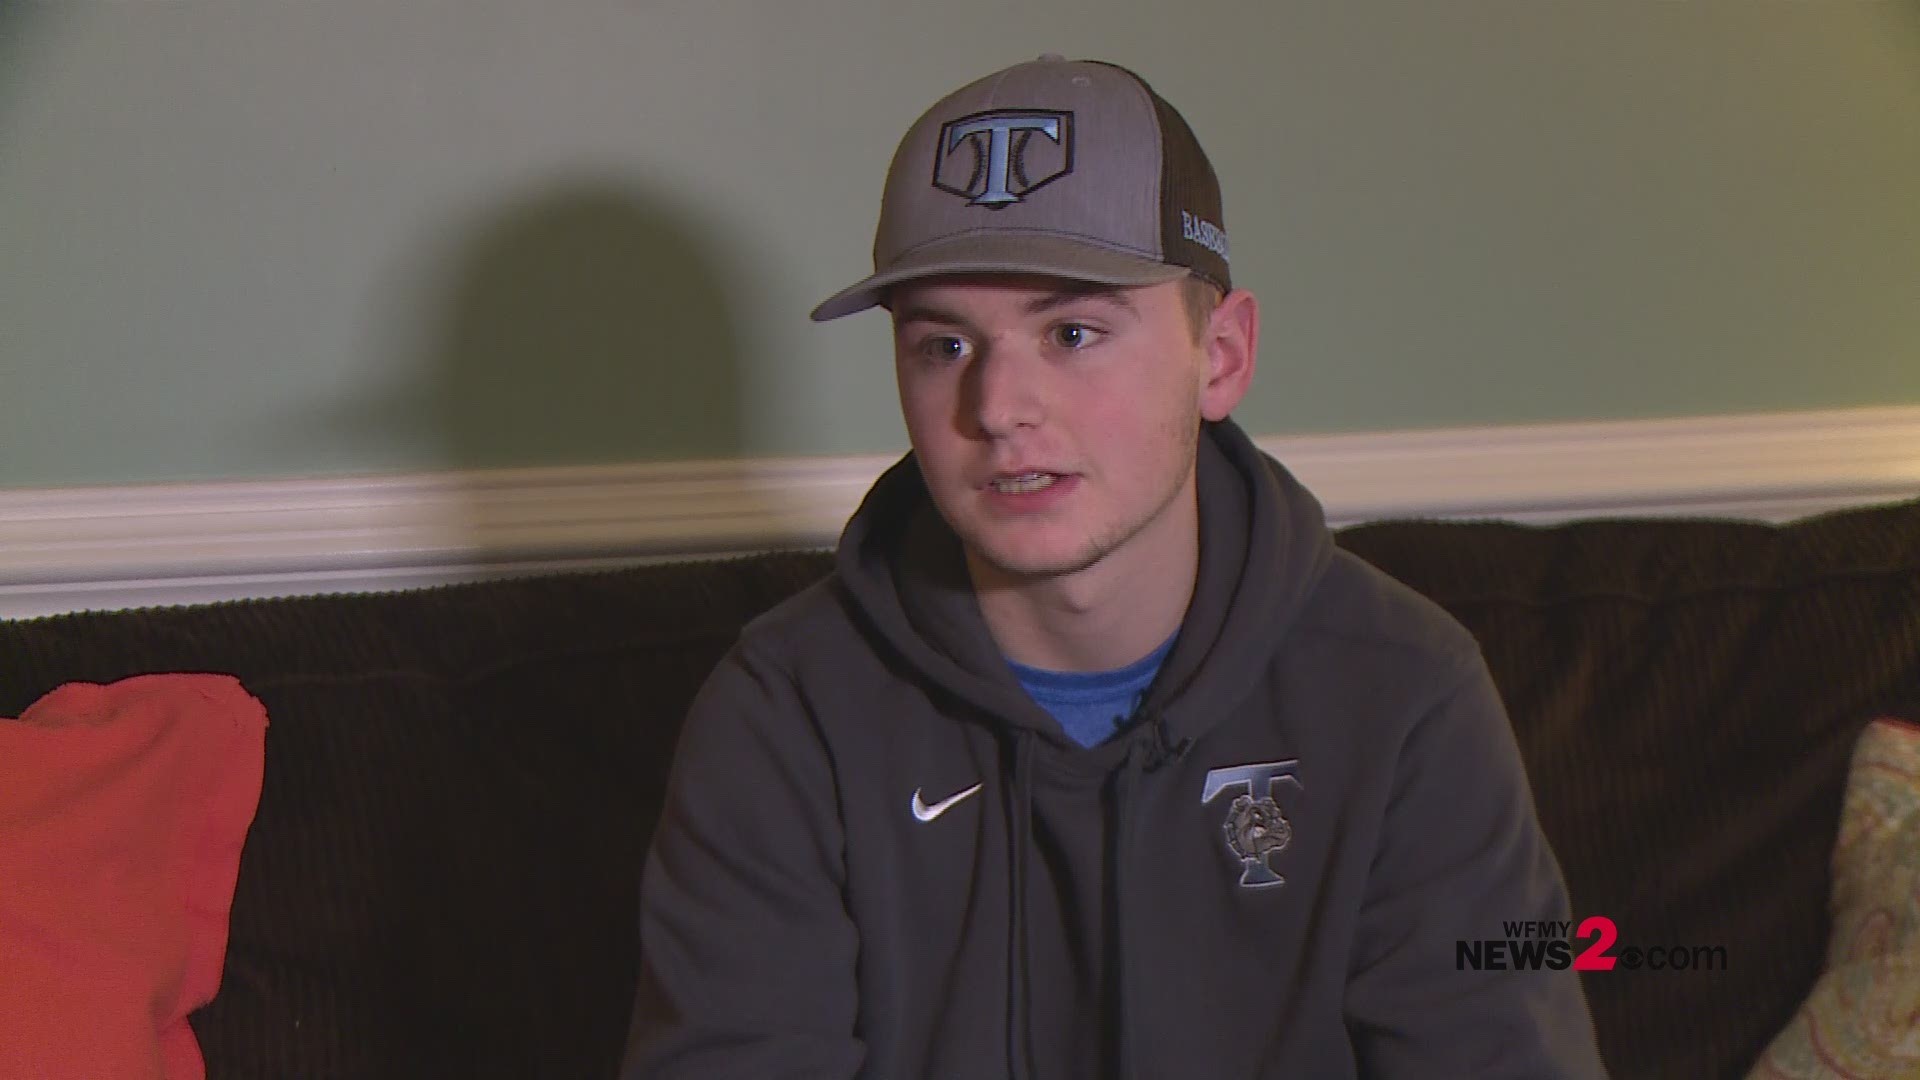 Courage is what describes 17-year-old, Tyler Bova. The Trinity student is the only survivor after his family was killed in a car crash in Utah. Tyler is now learning to walk again. He says, "I just know they want the best for me."